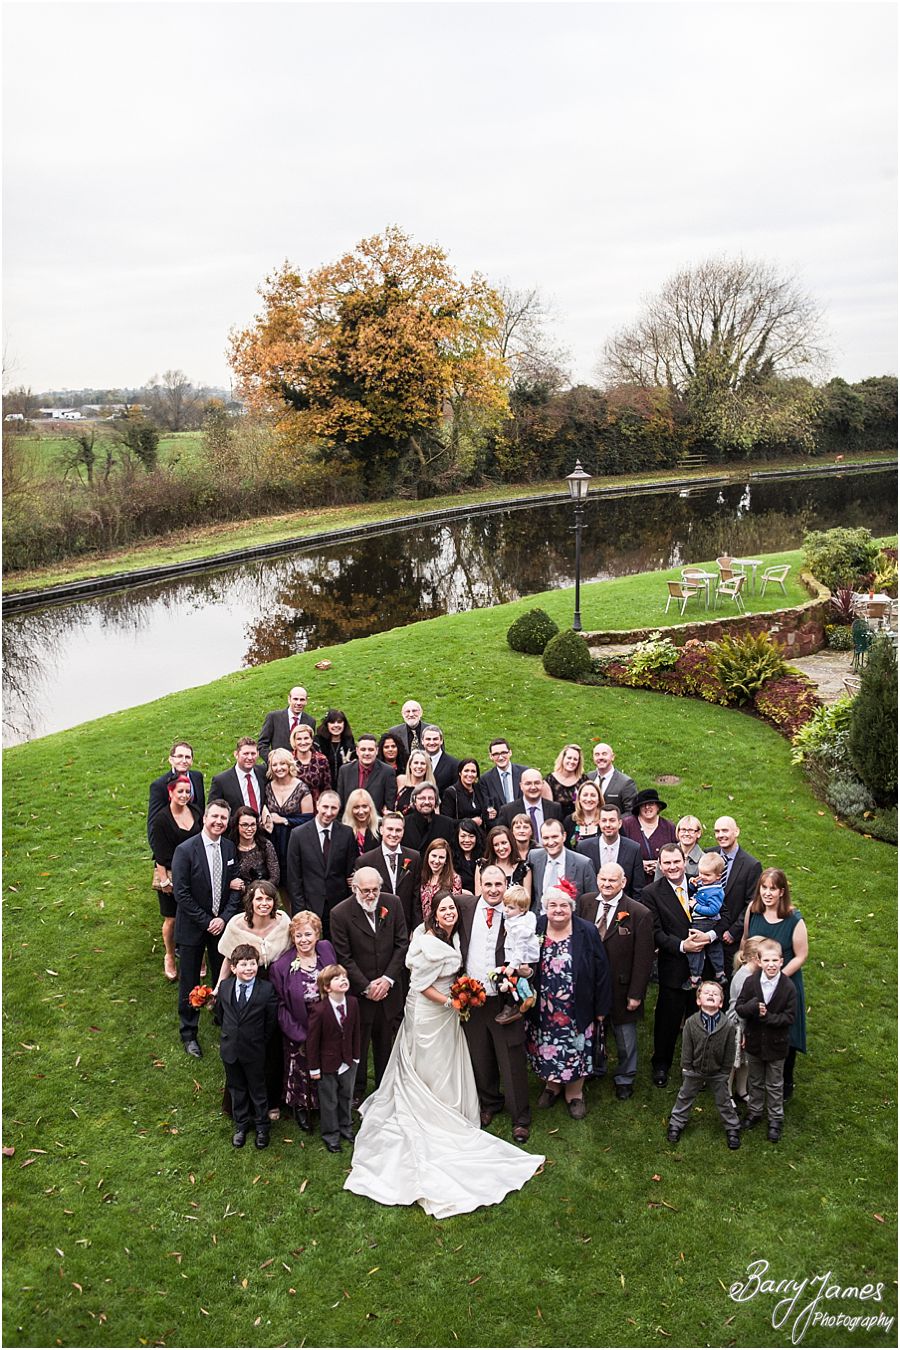 Relaxed real wedding photography at The Moat House in Stafford by Moat House Preferred Wedding Photographer Barry James